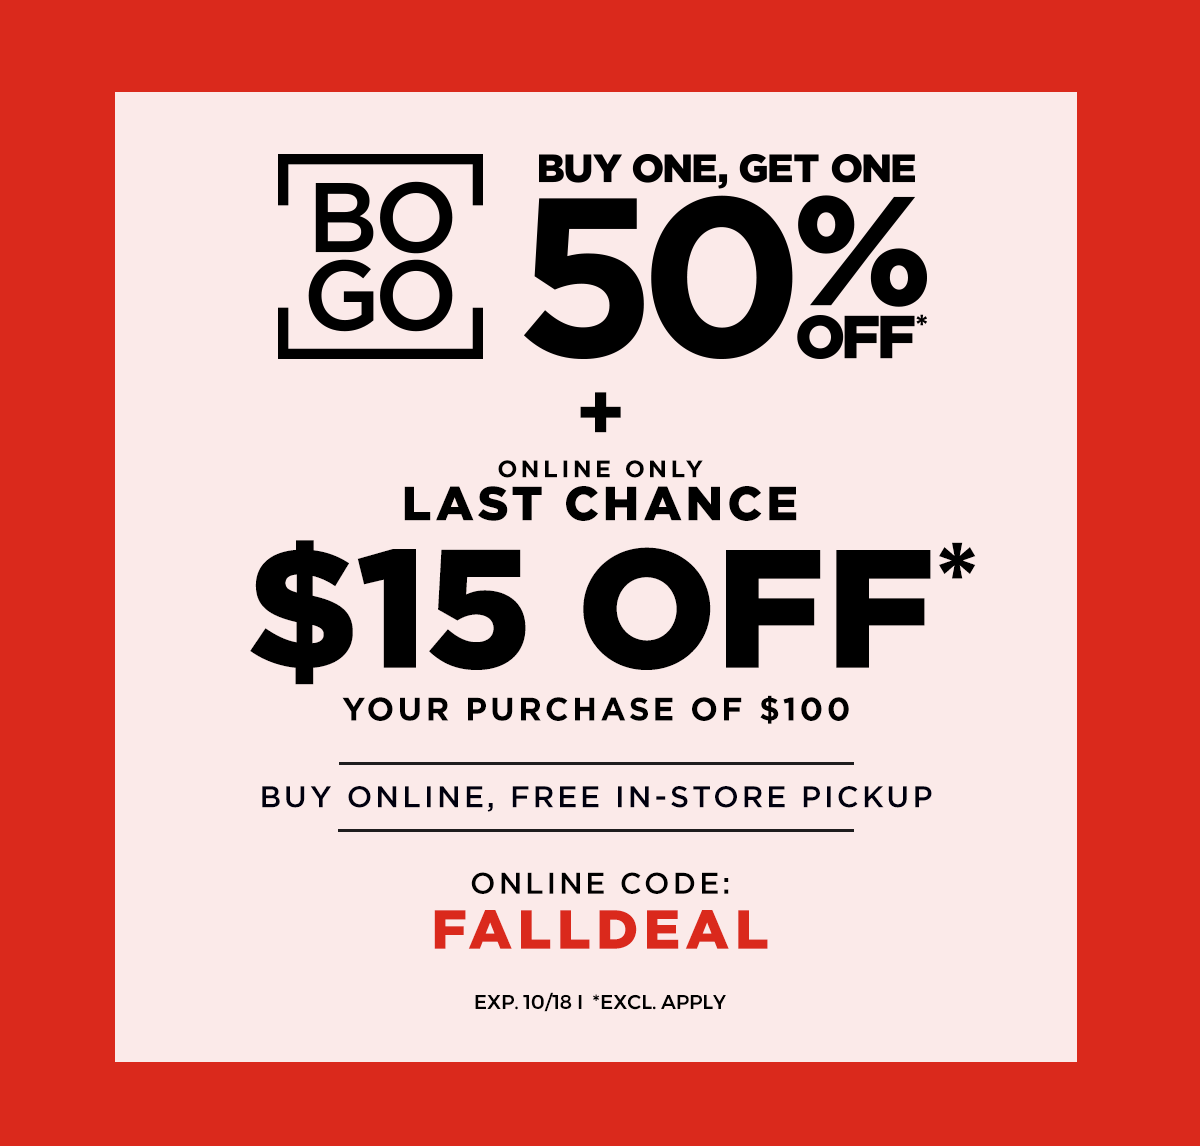 BOGO 50% OFF* LAST CHANCE, \\$15 OFF* \\$100 ONLINE CODE: FALLDEAL BUY ONLINE, FREE IN-STORE PICKUP EXP. 10/18 *EXCL. APPLY